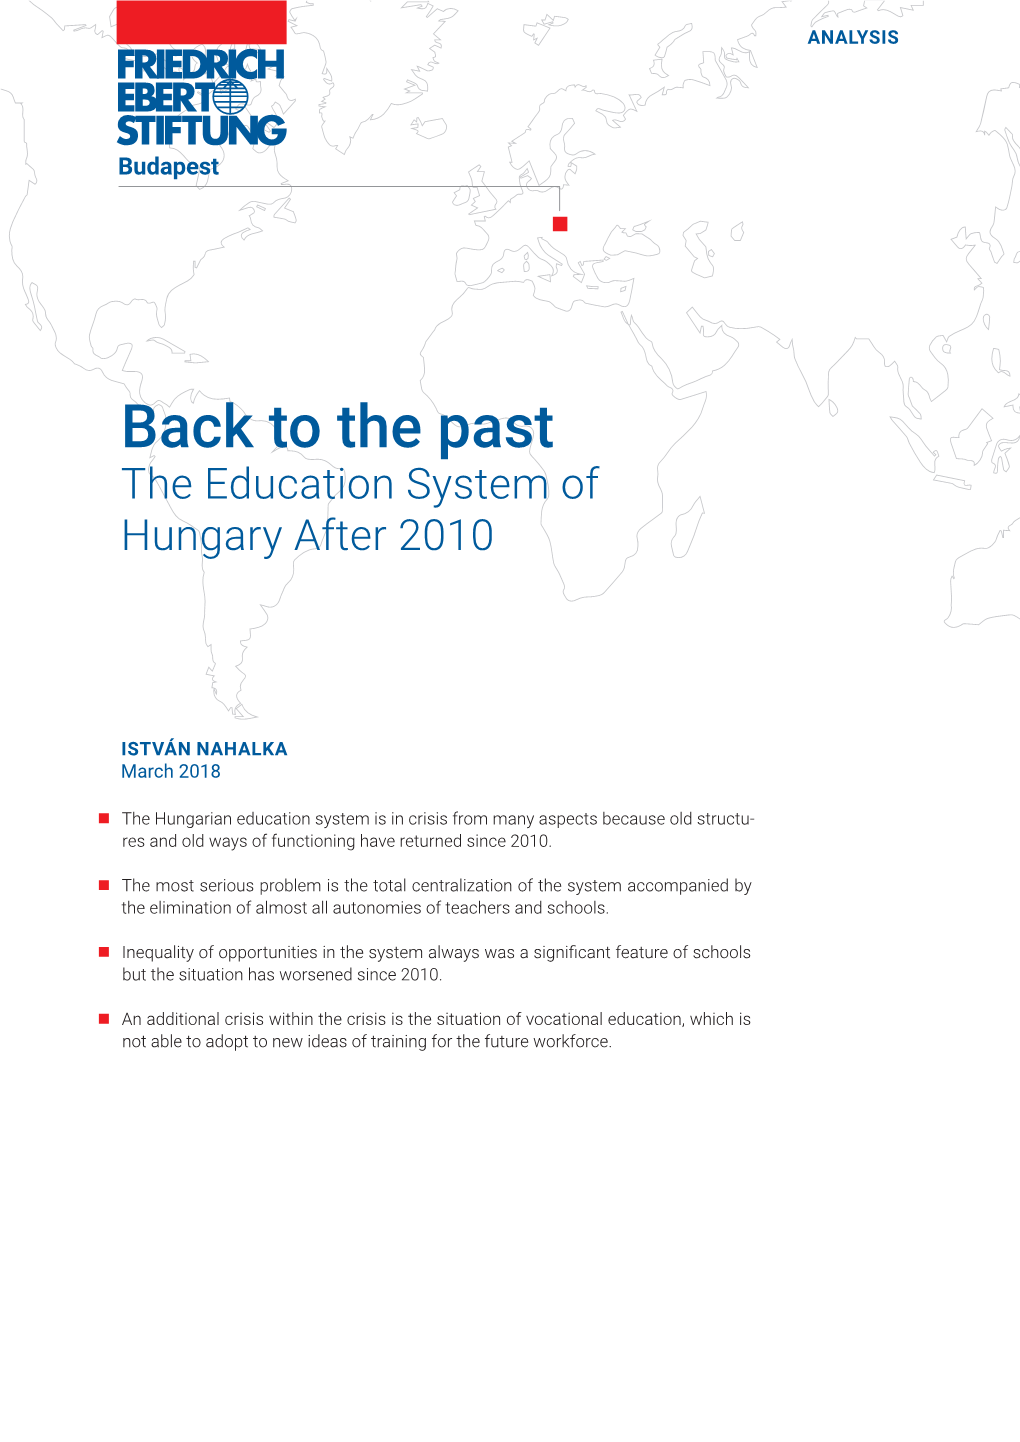 The Education System of Hungary After 2010